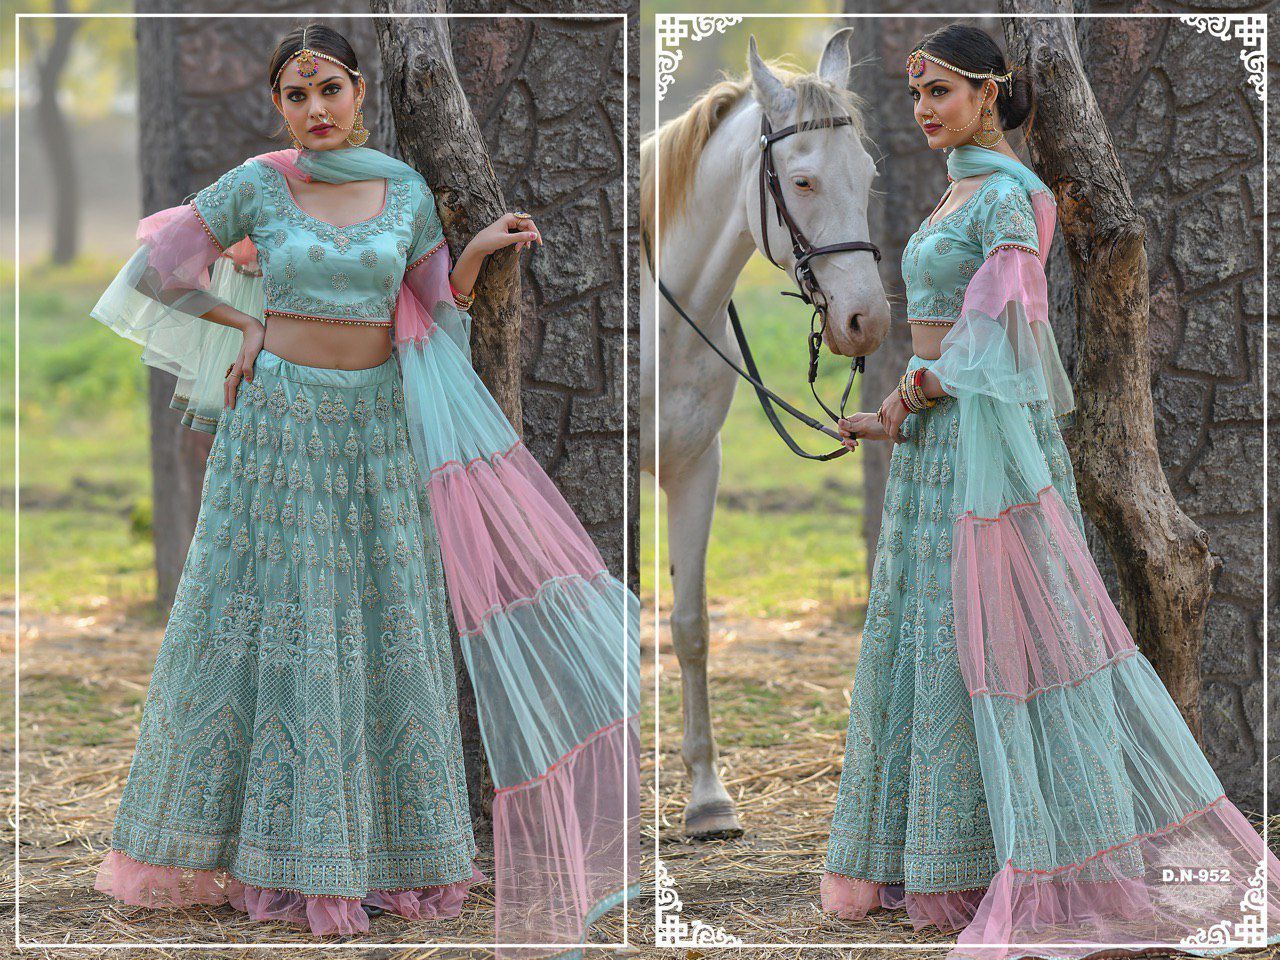 Designer pearl blue pink embroidery - $135